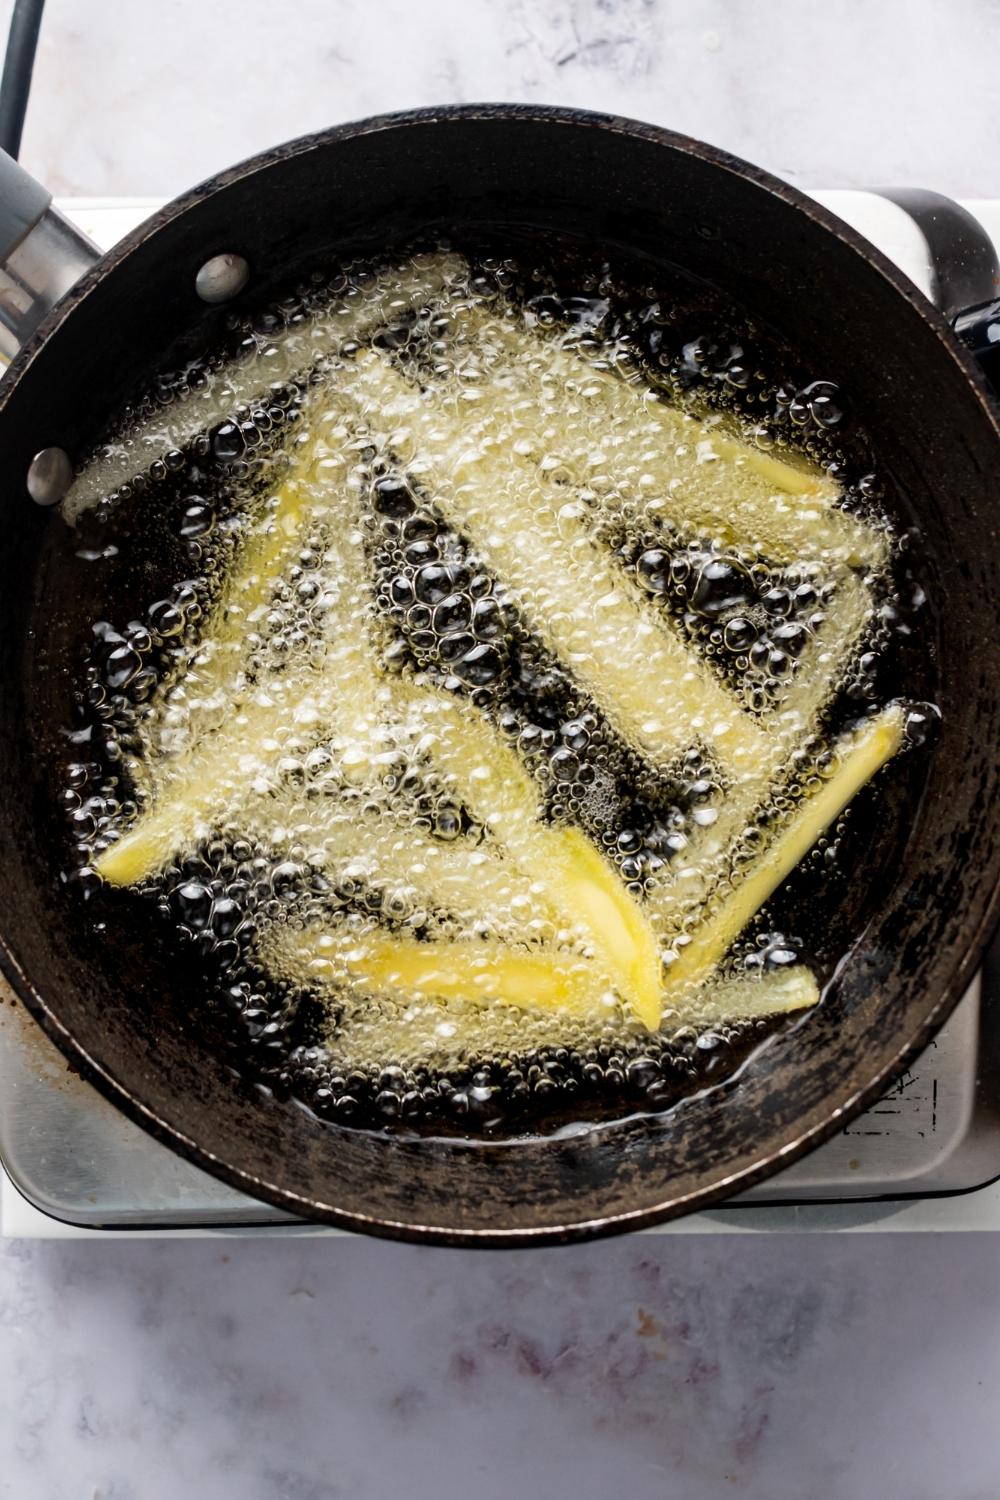 An overhead view of a pot with hot oil and fries frying.